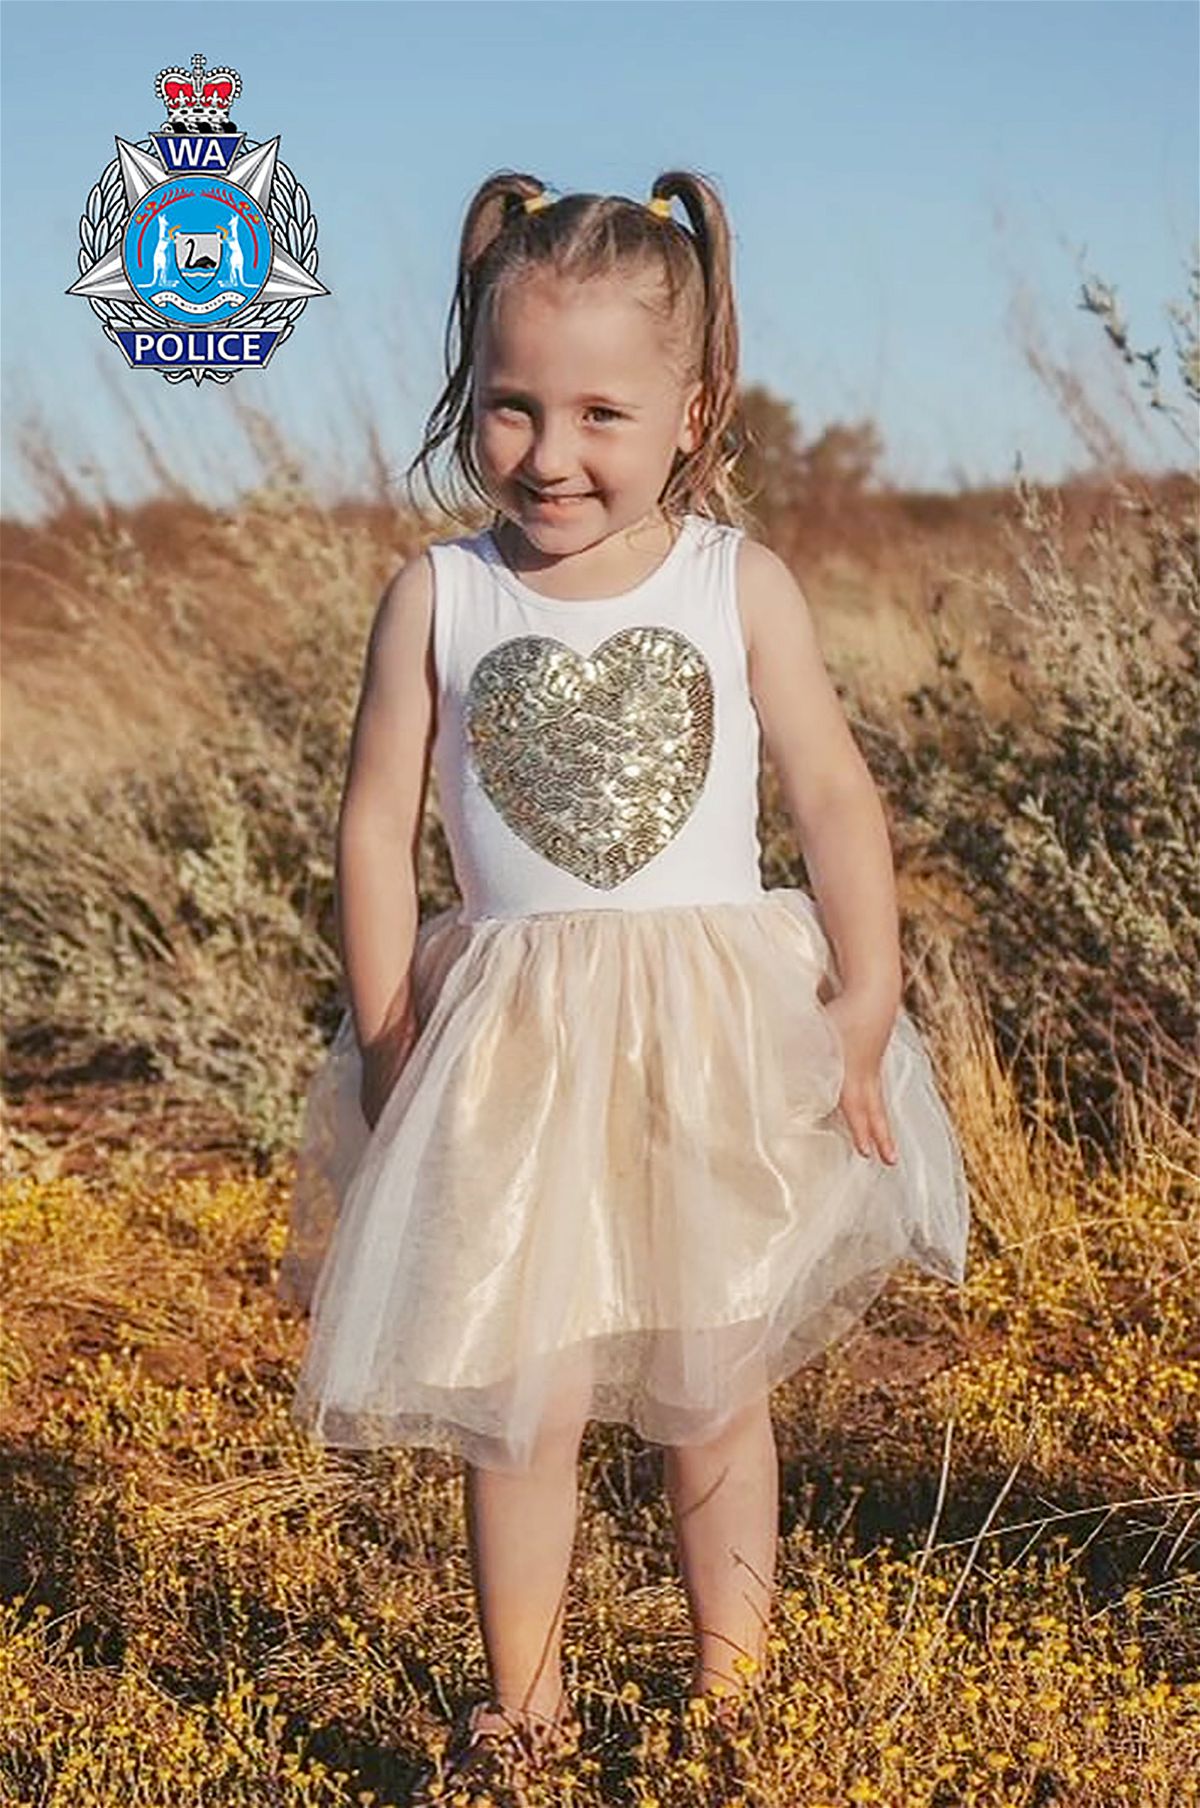 <i>Western Australia Police Force</i><br/>Australian authorities are searching for four-year-old Cleo Smith